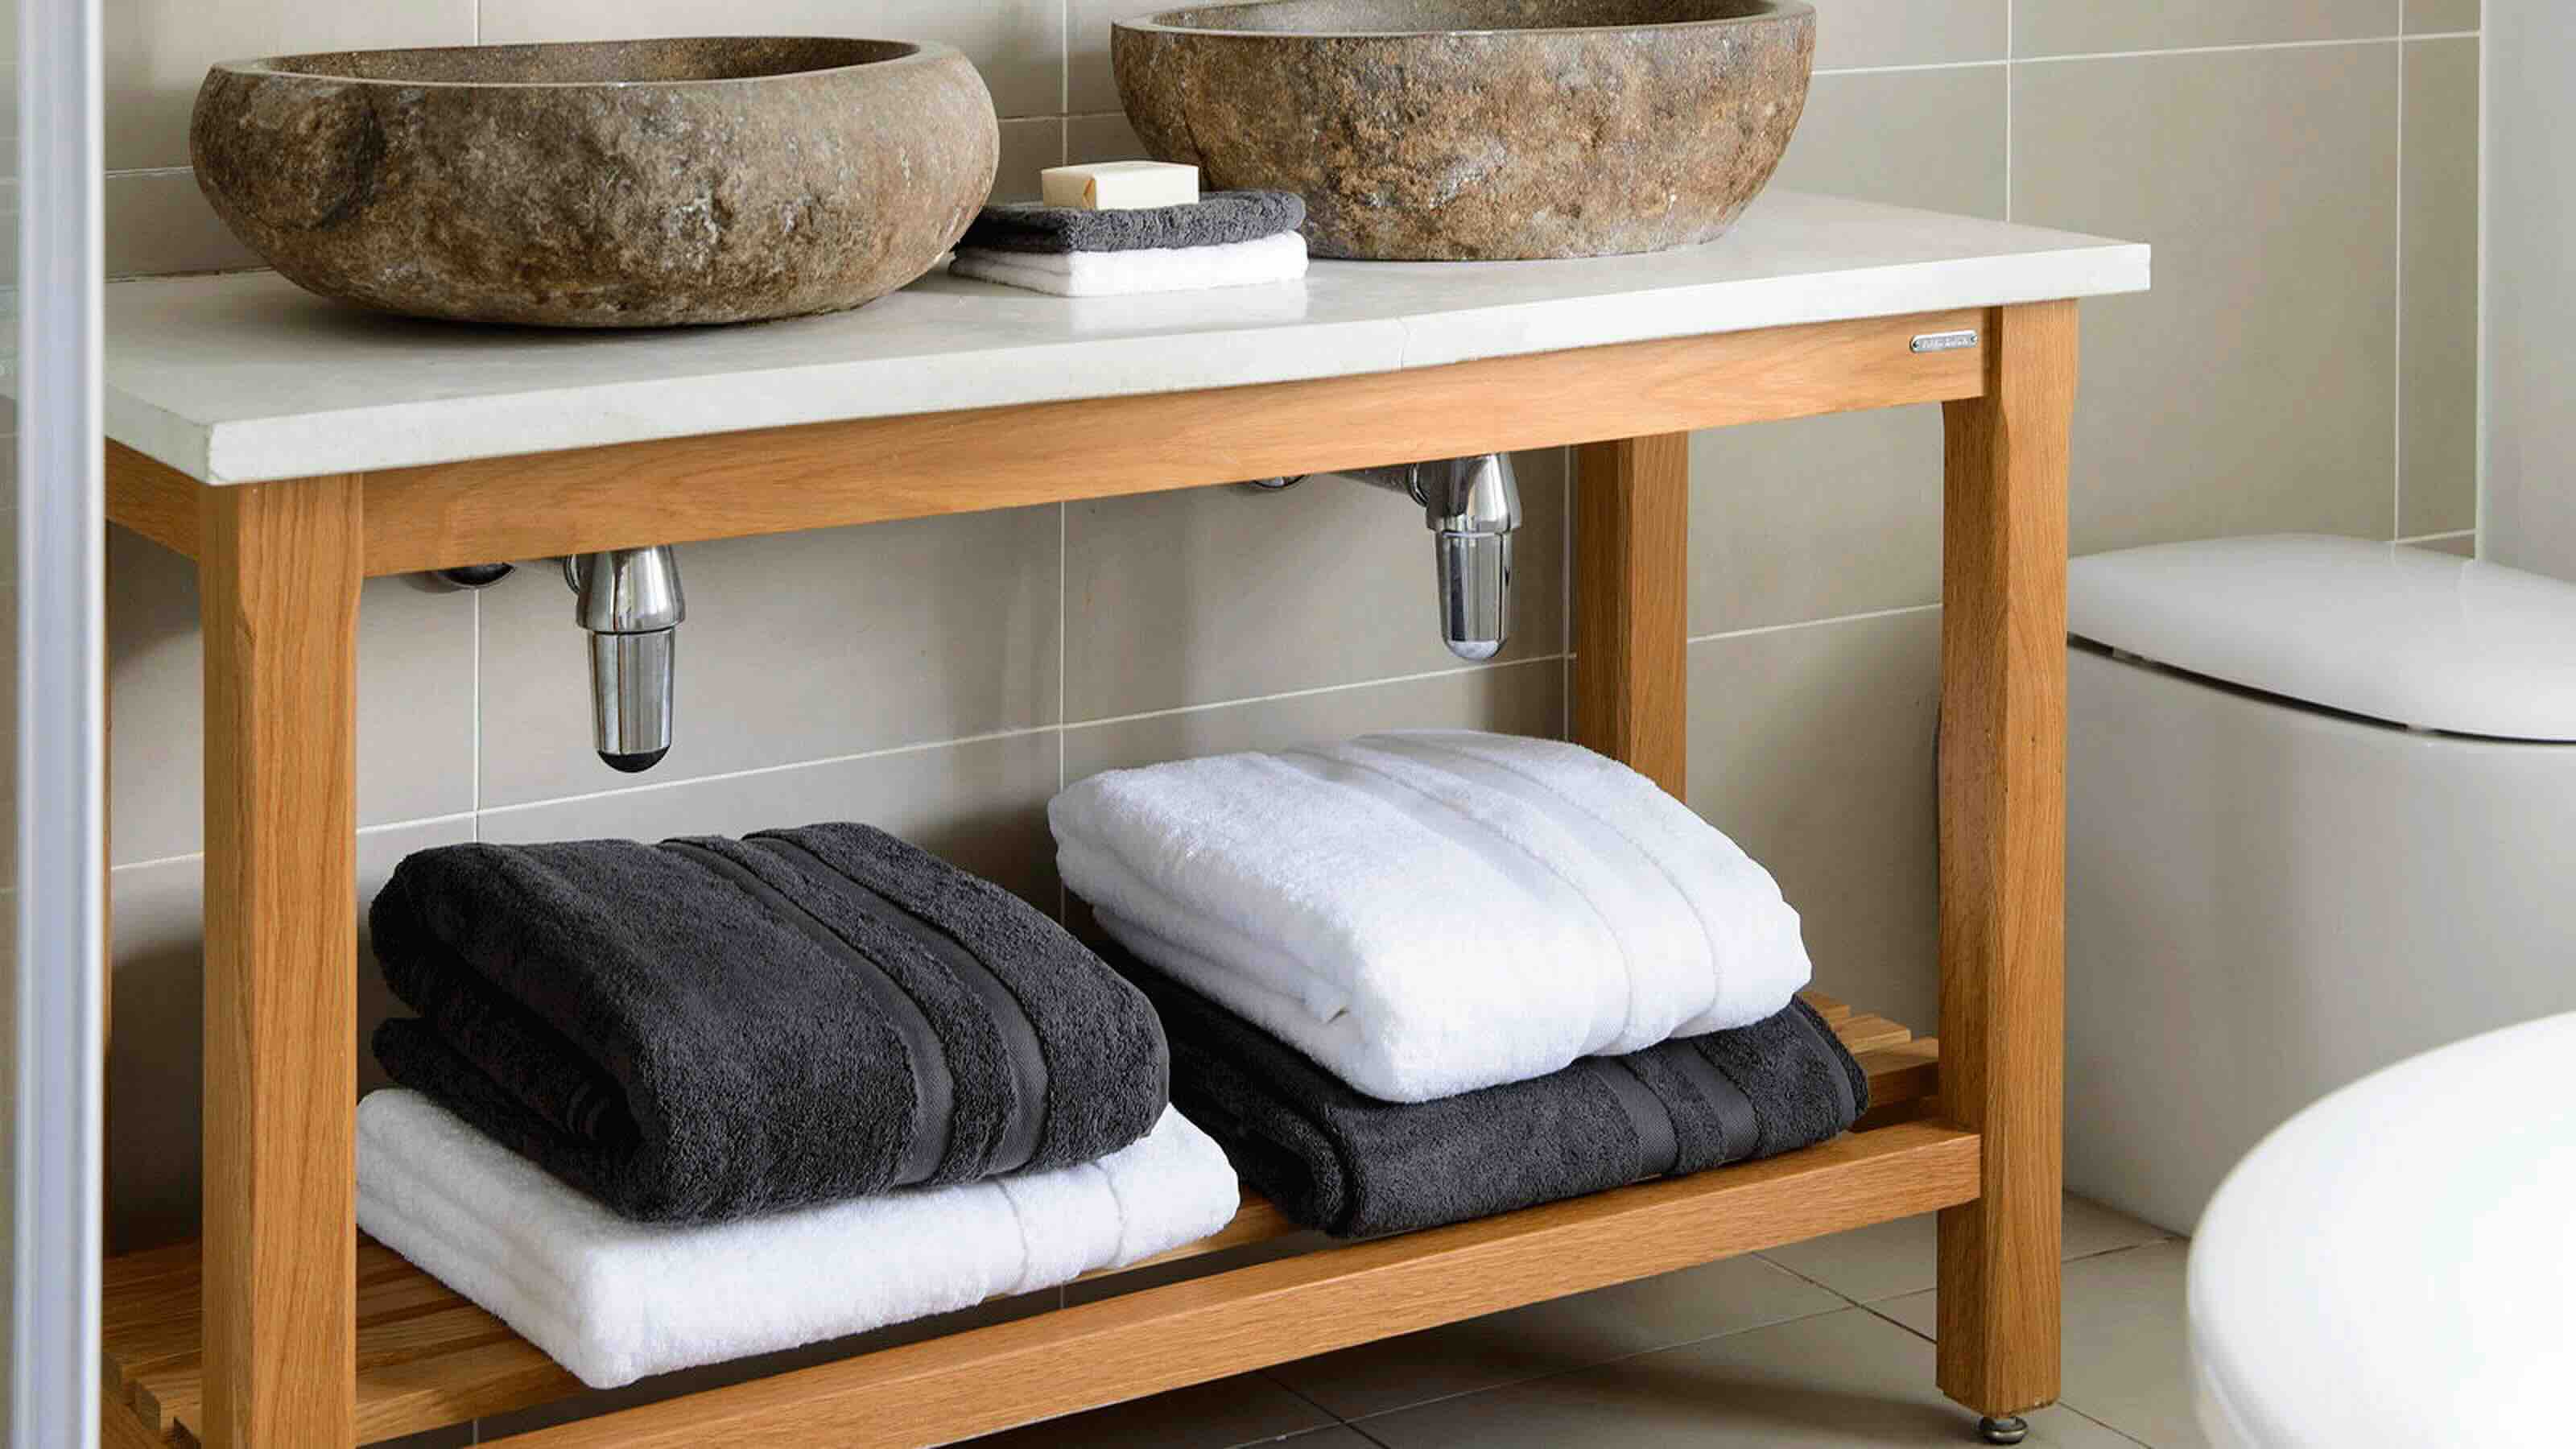 How To Store Towels In A Small Bathroom